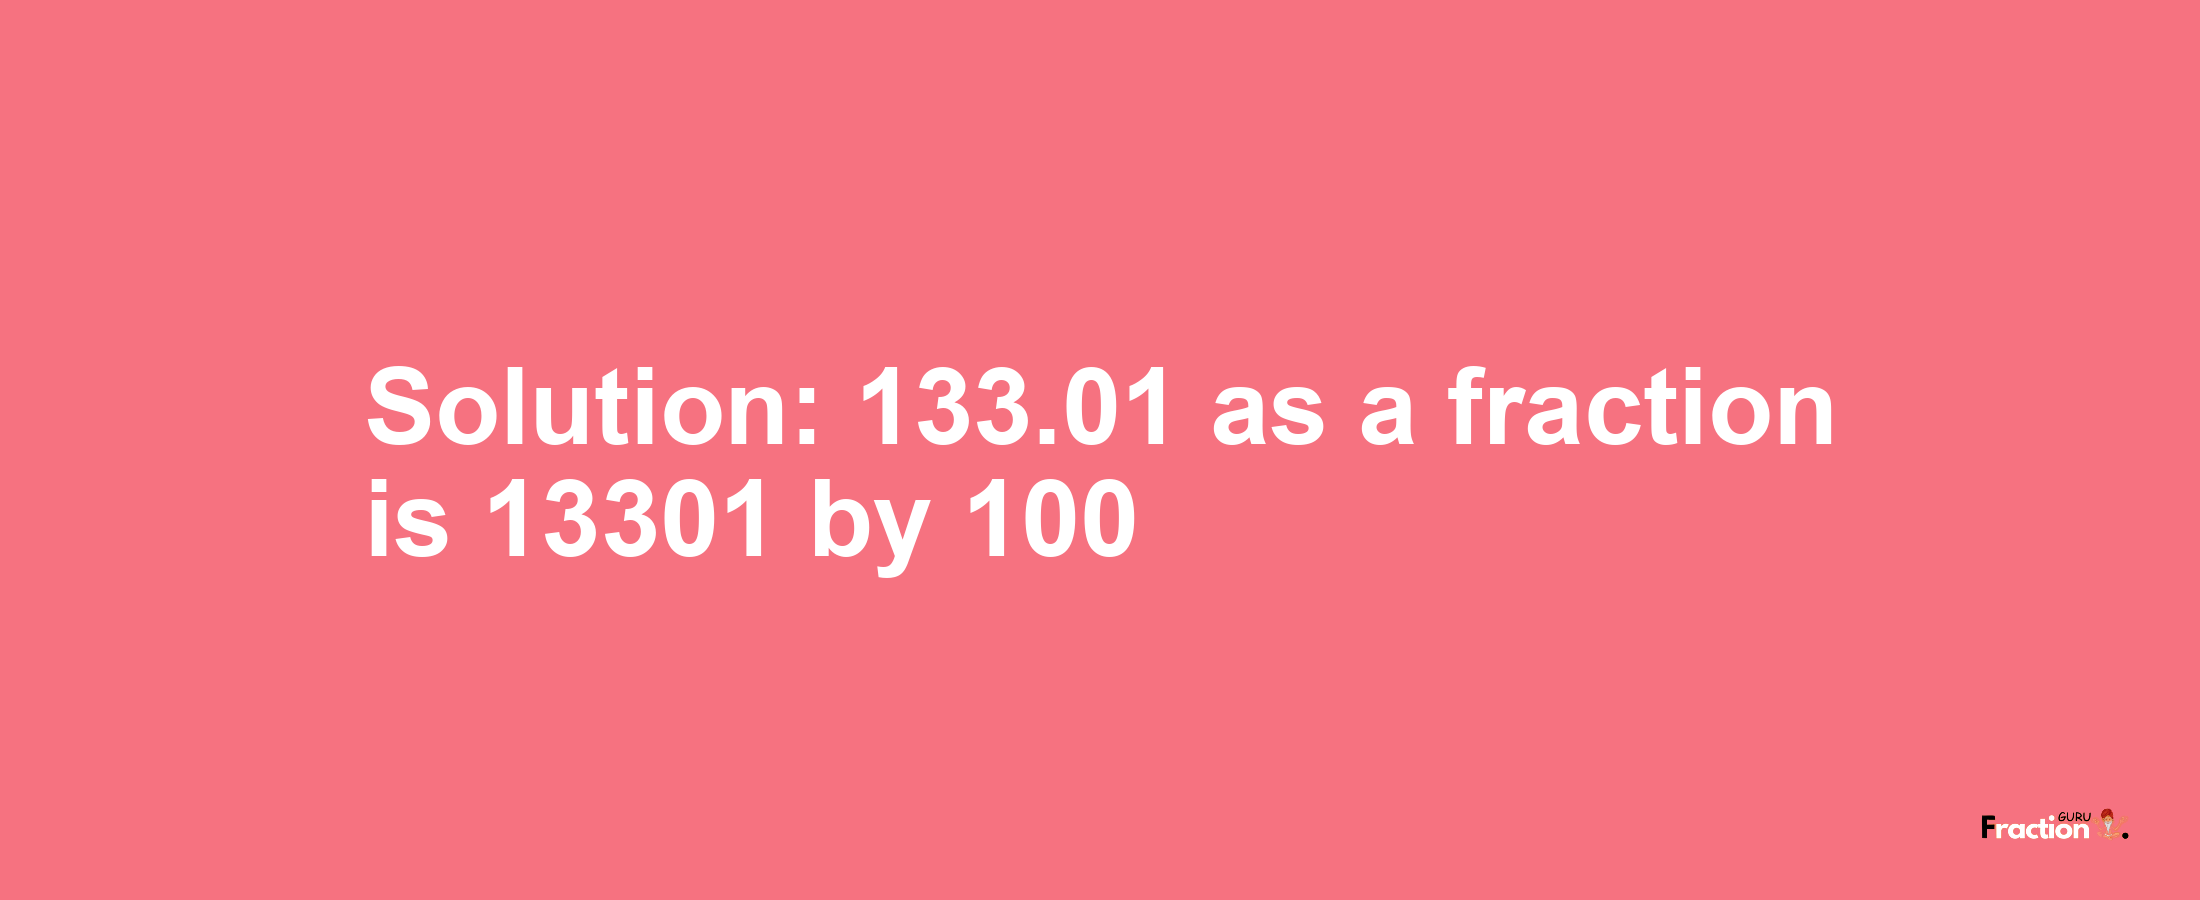 Solution:133.01 as a fraction is 13301/100